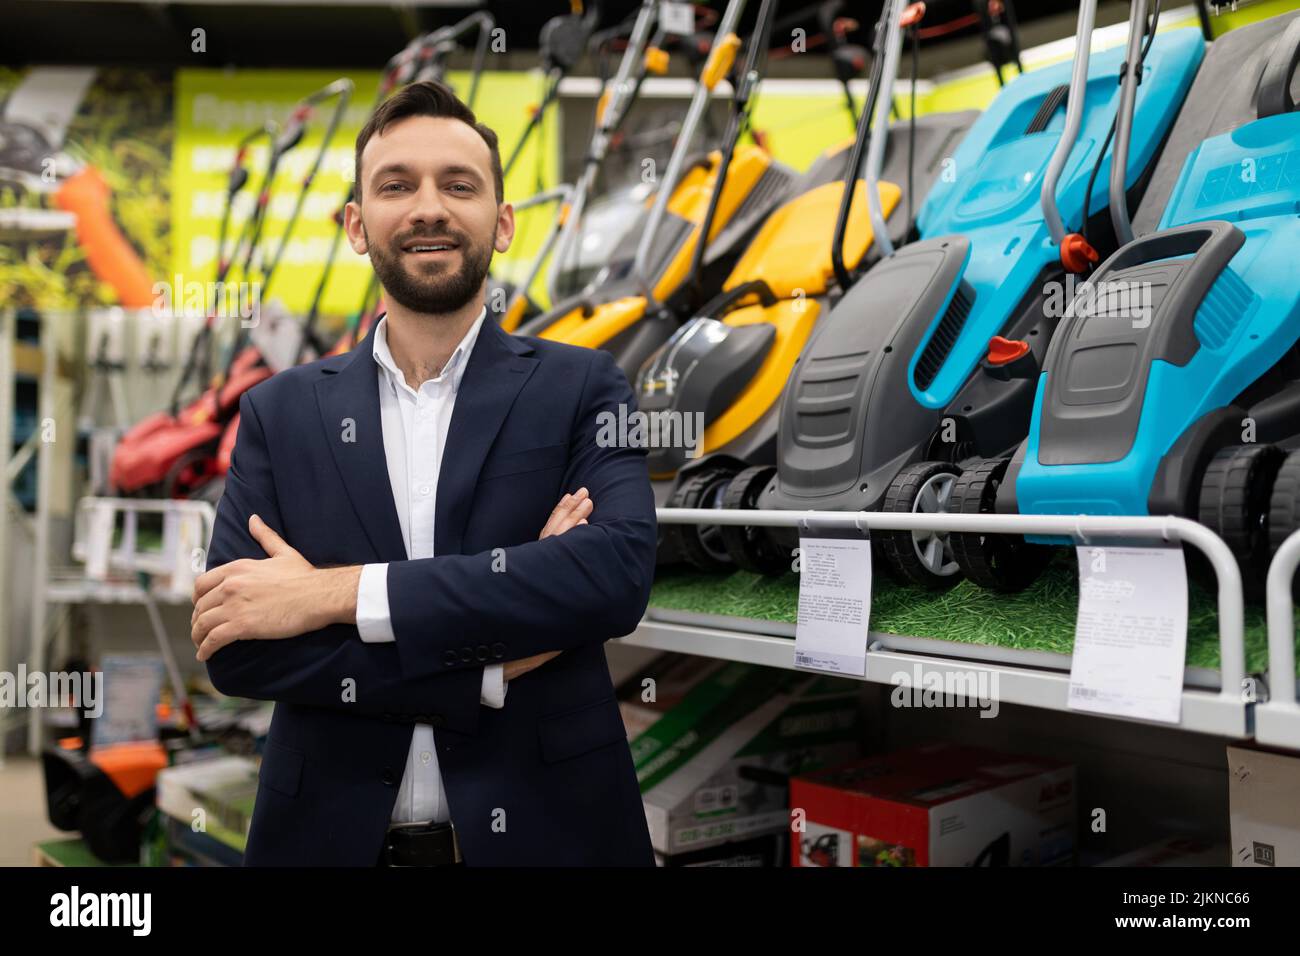 portrait of a shop manager selling electric and petrol lawn mowers Stock Photo